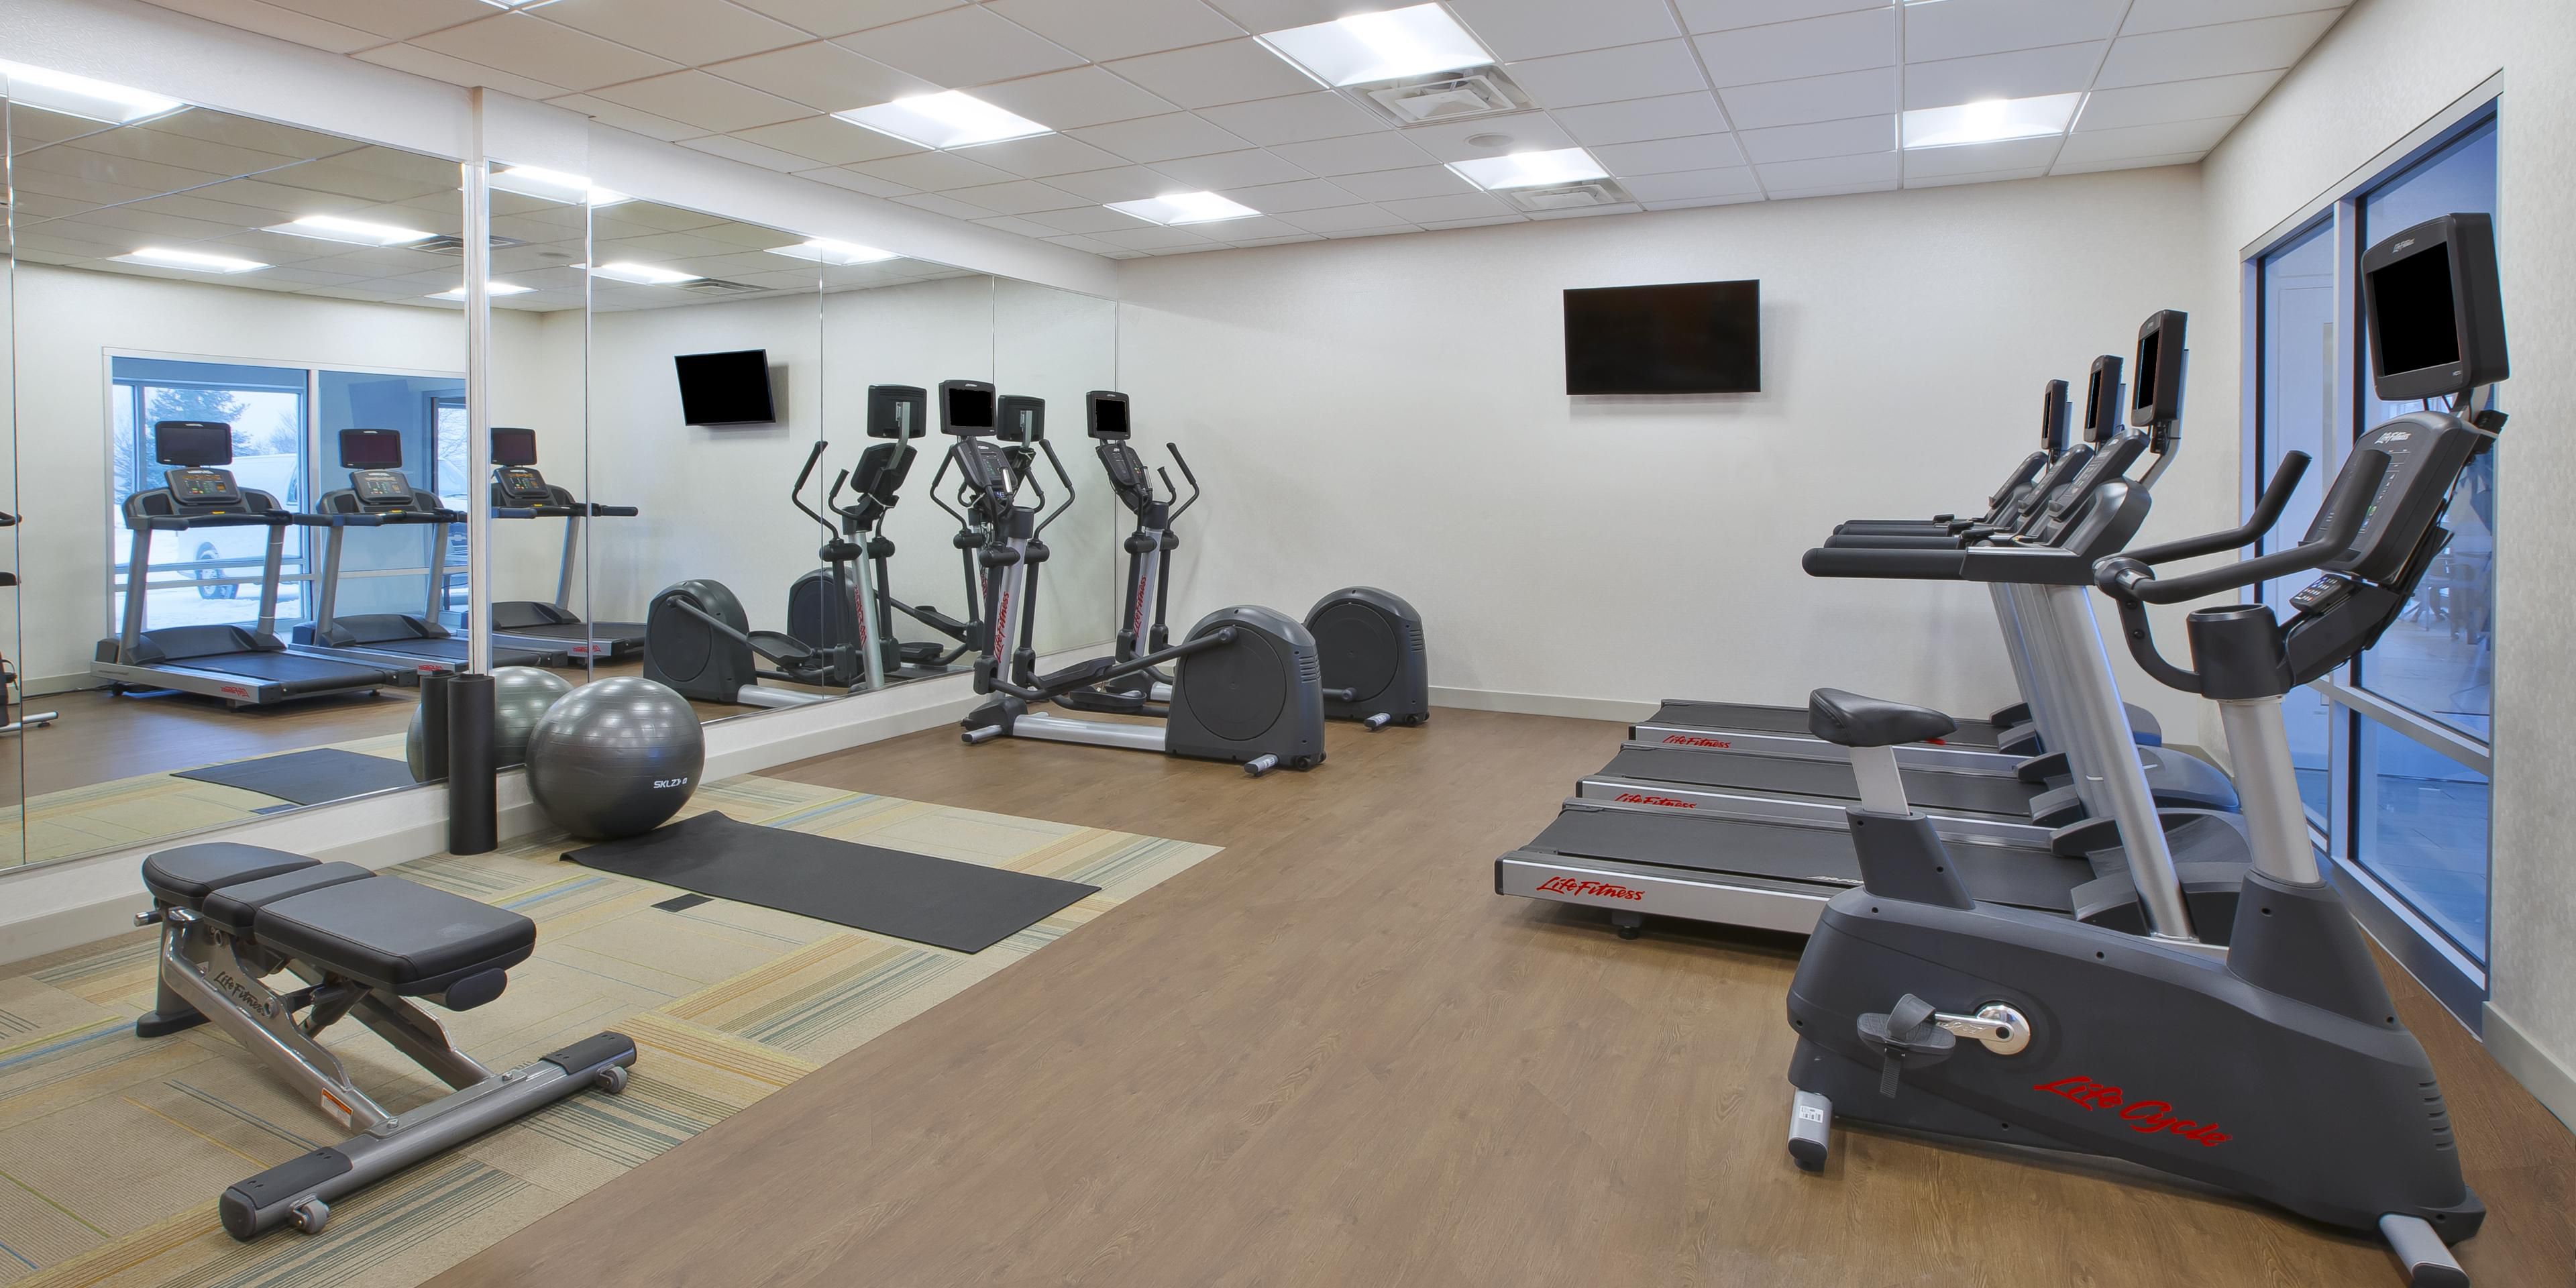 Stay in shape! Enjoy our state of the art 24hr workout facility while you stay with us.